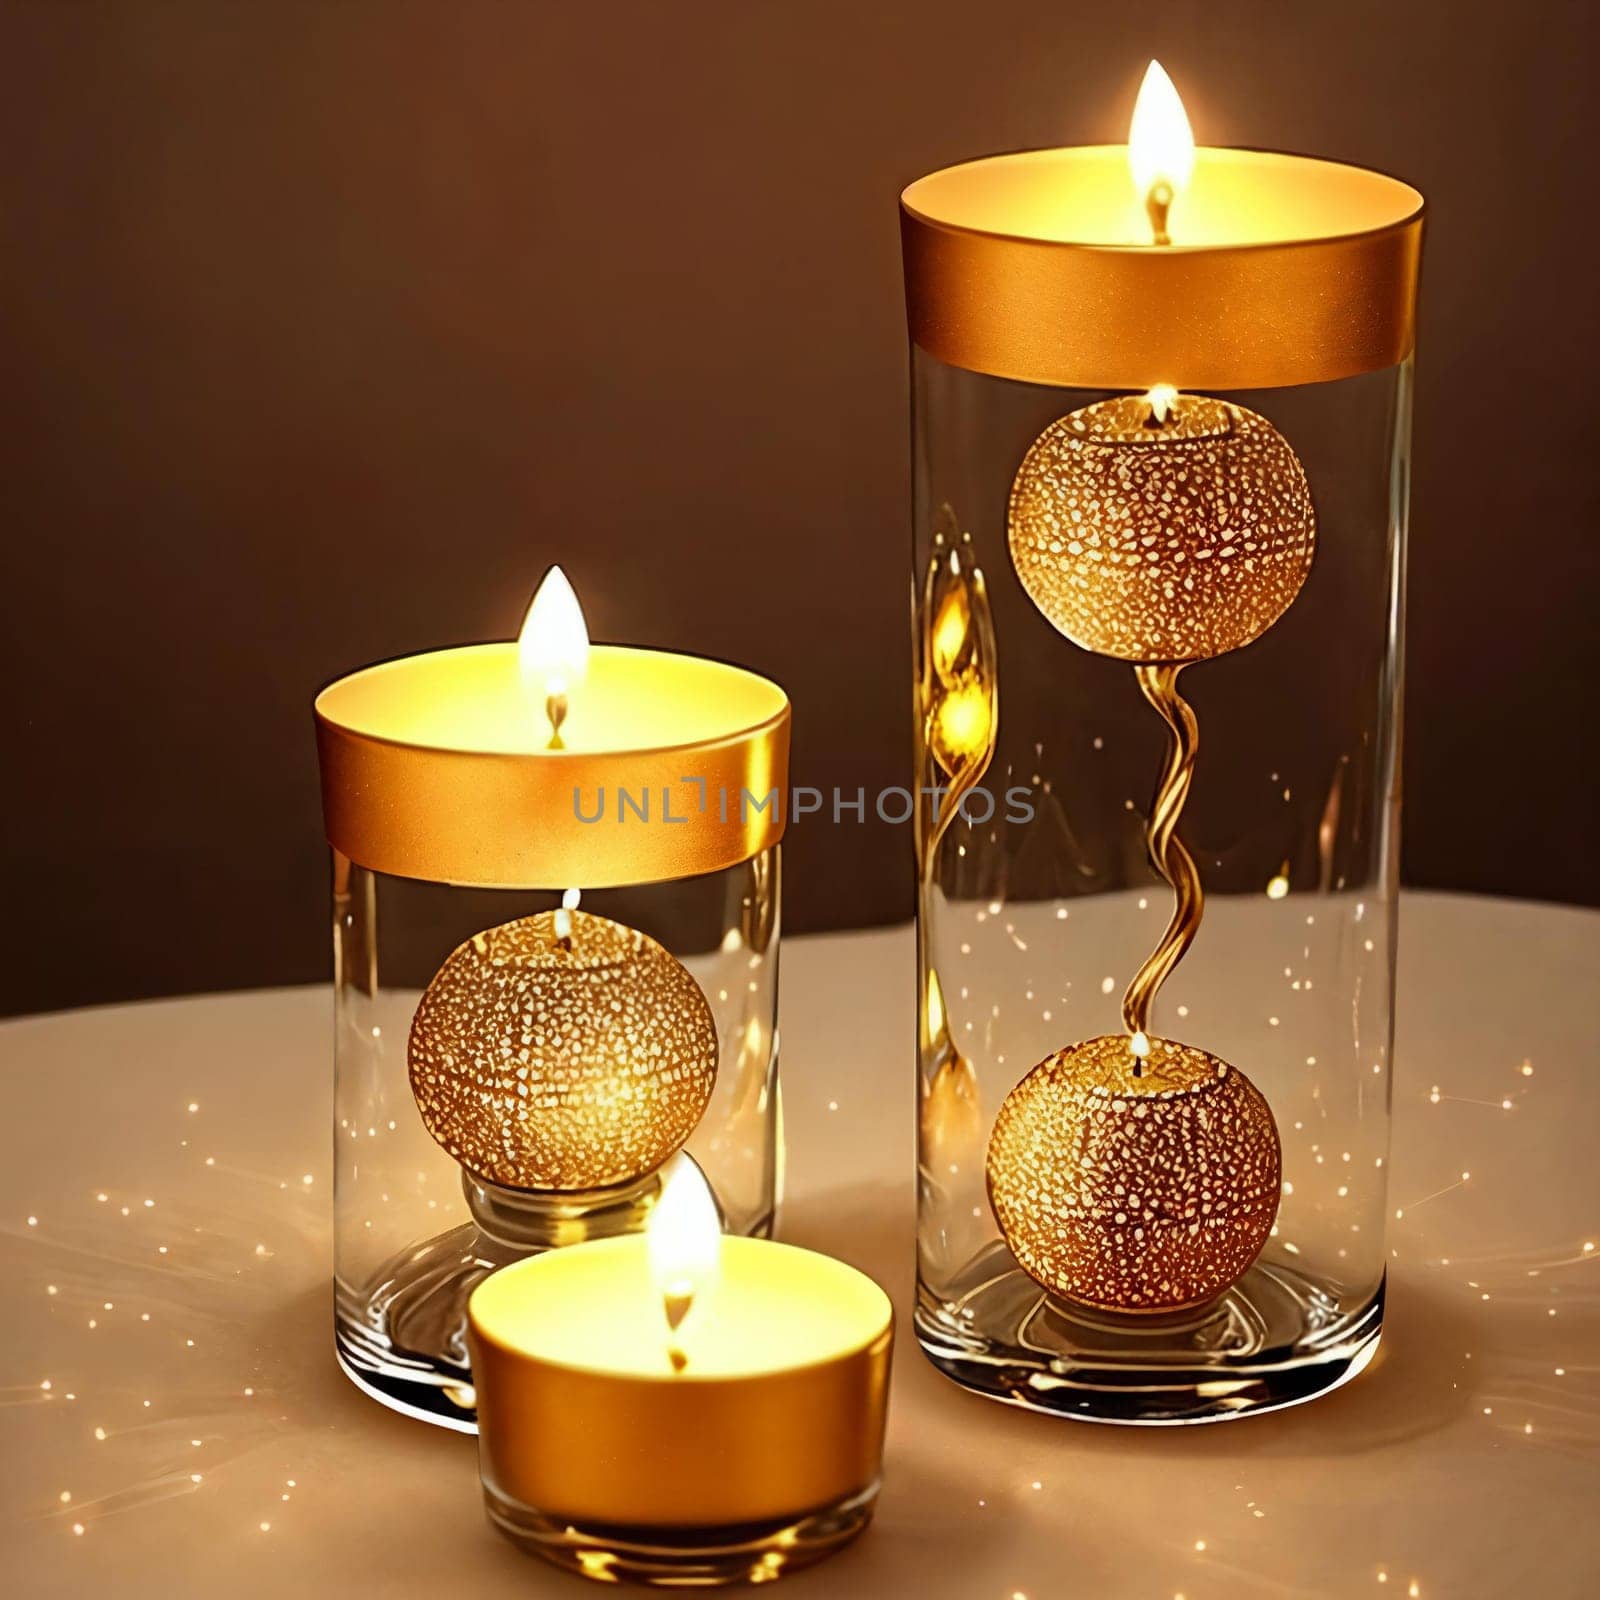 Cluster of decorative glass candle holders reflecting the warm glow of flickering candles. by GoodOlga